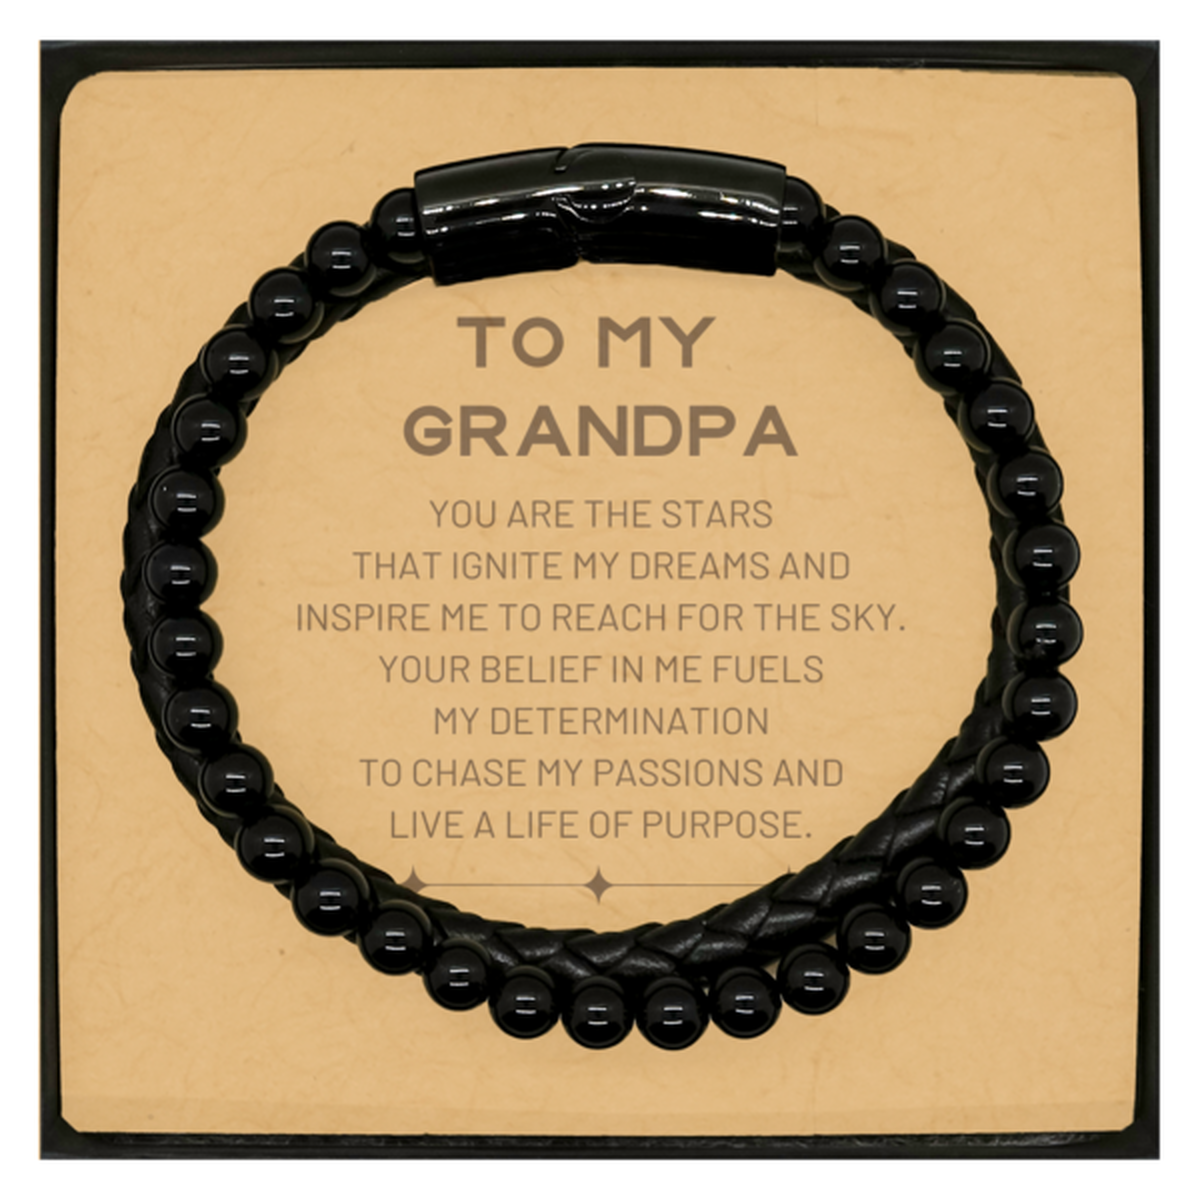 To My Grandpa Stone Leather Bracelets, You are the stars that ignite my dreams and inspire me to reach for the sky, Birthday Christmas Unique Gifts For Grandpa, Thank You Gifts For Grandpa